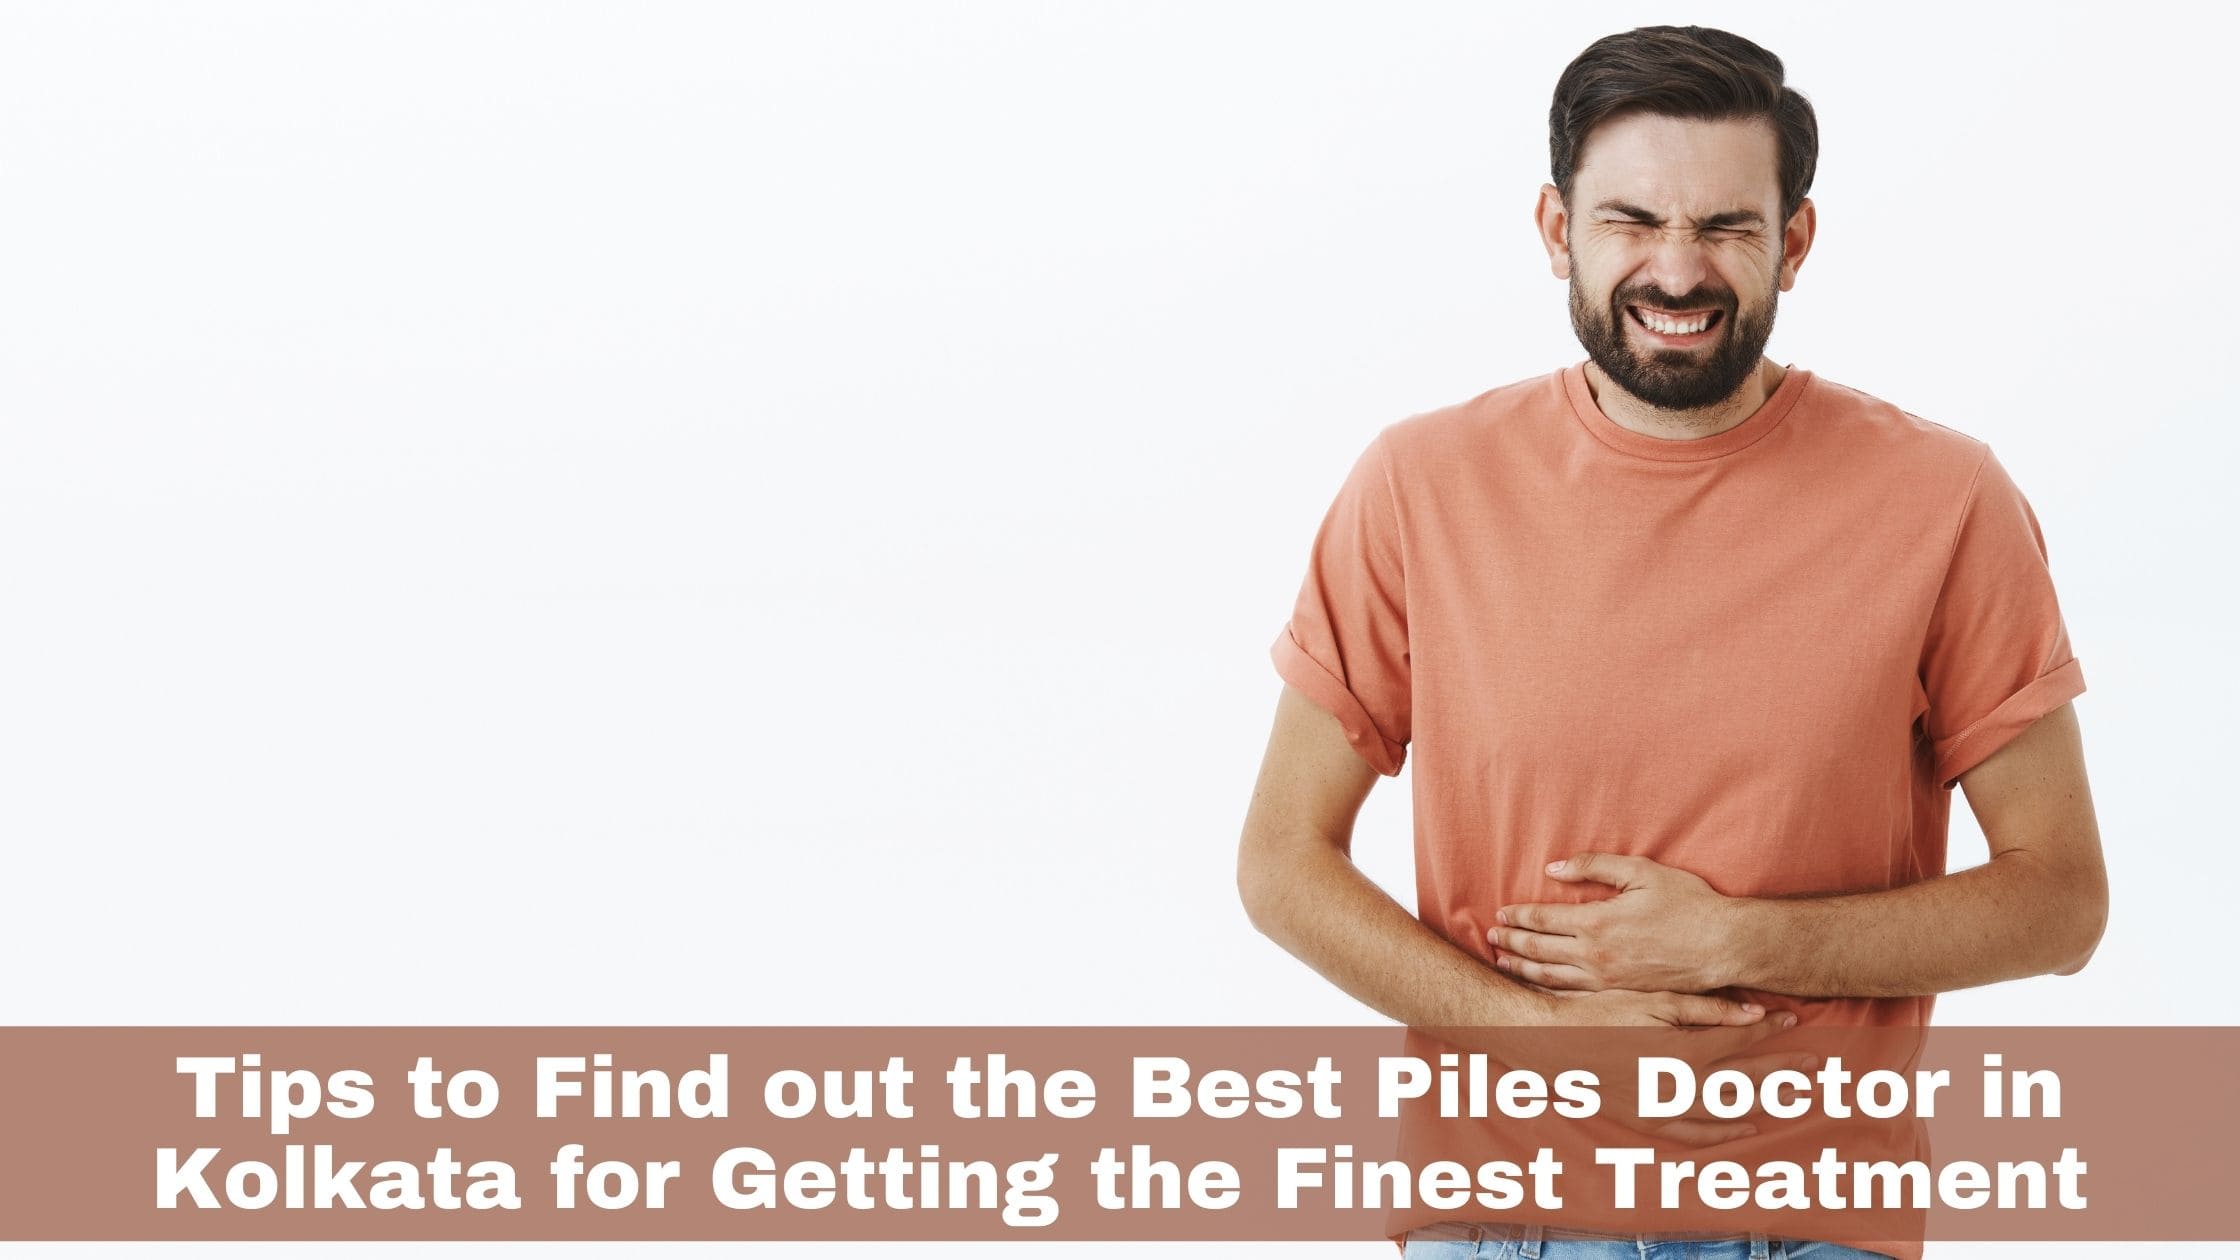 You are currently viewing Tips to Find out the Best Piles Doctor in Kolkata for Getting the Finest Treatment